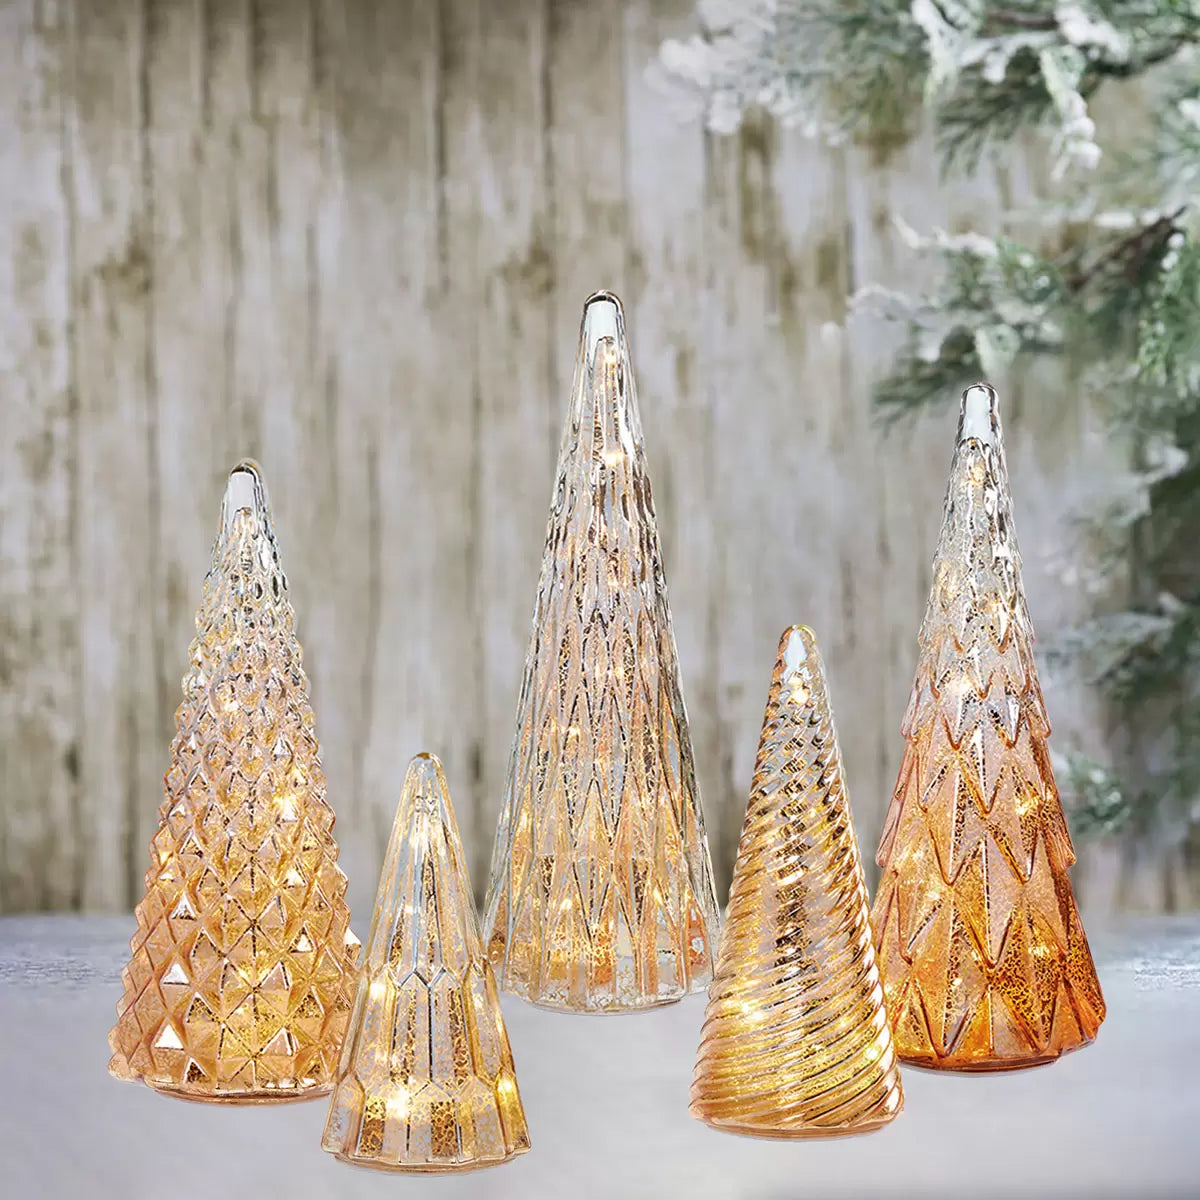 LED GLASS TREE SET OF 5 IN GOLD COLOR